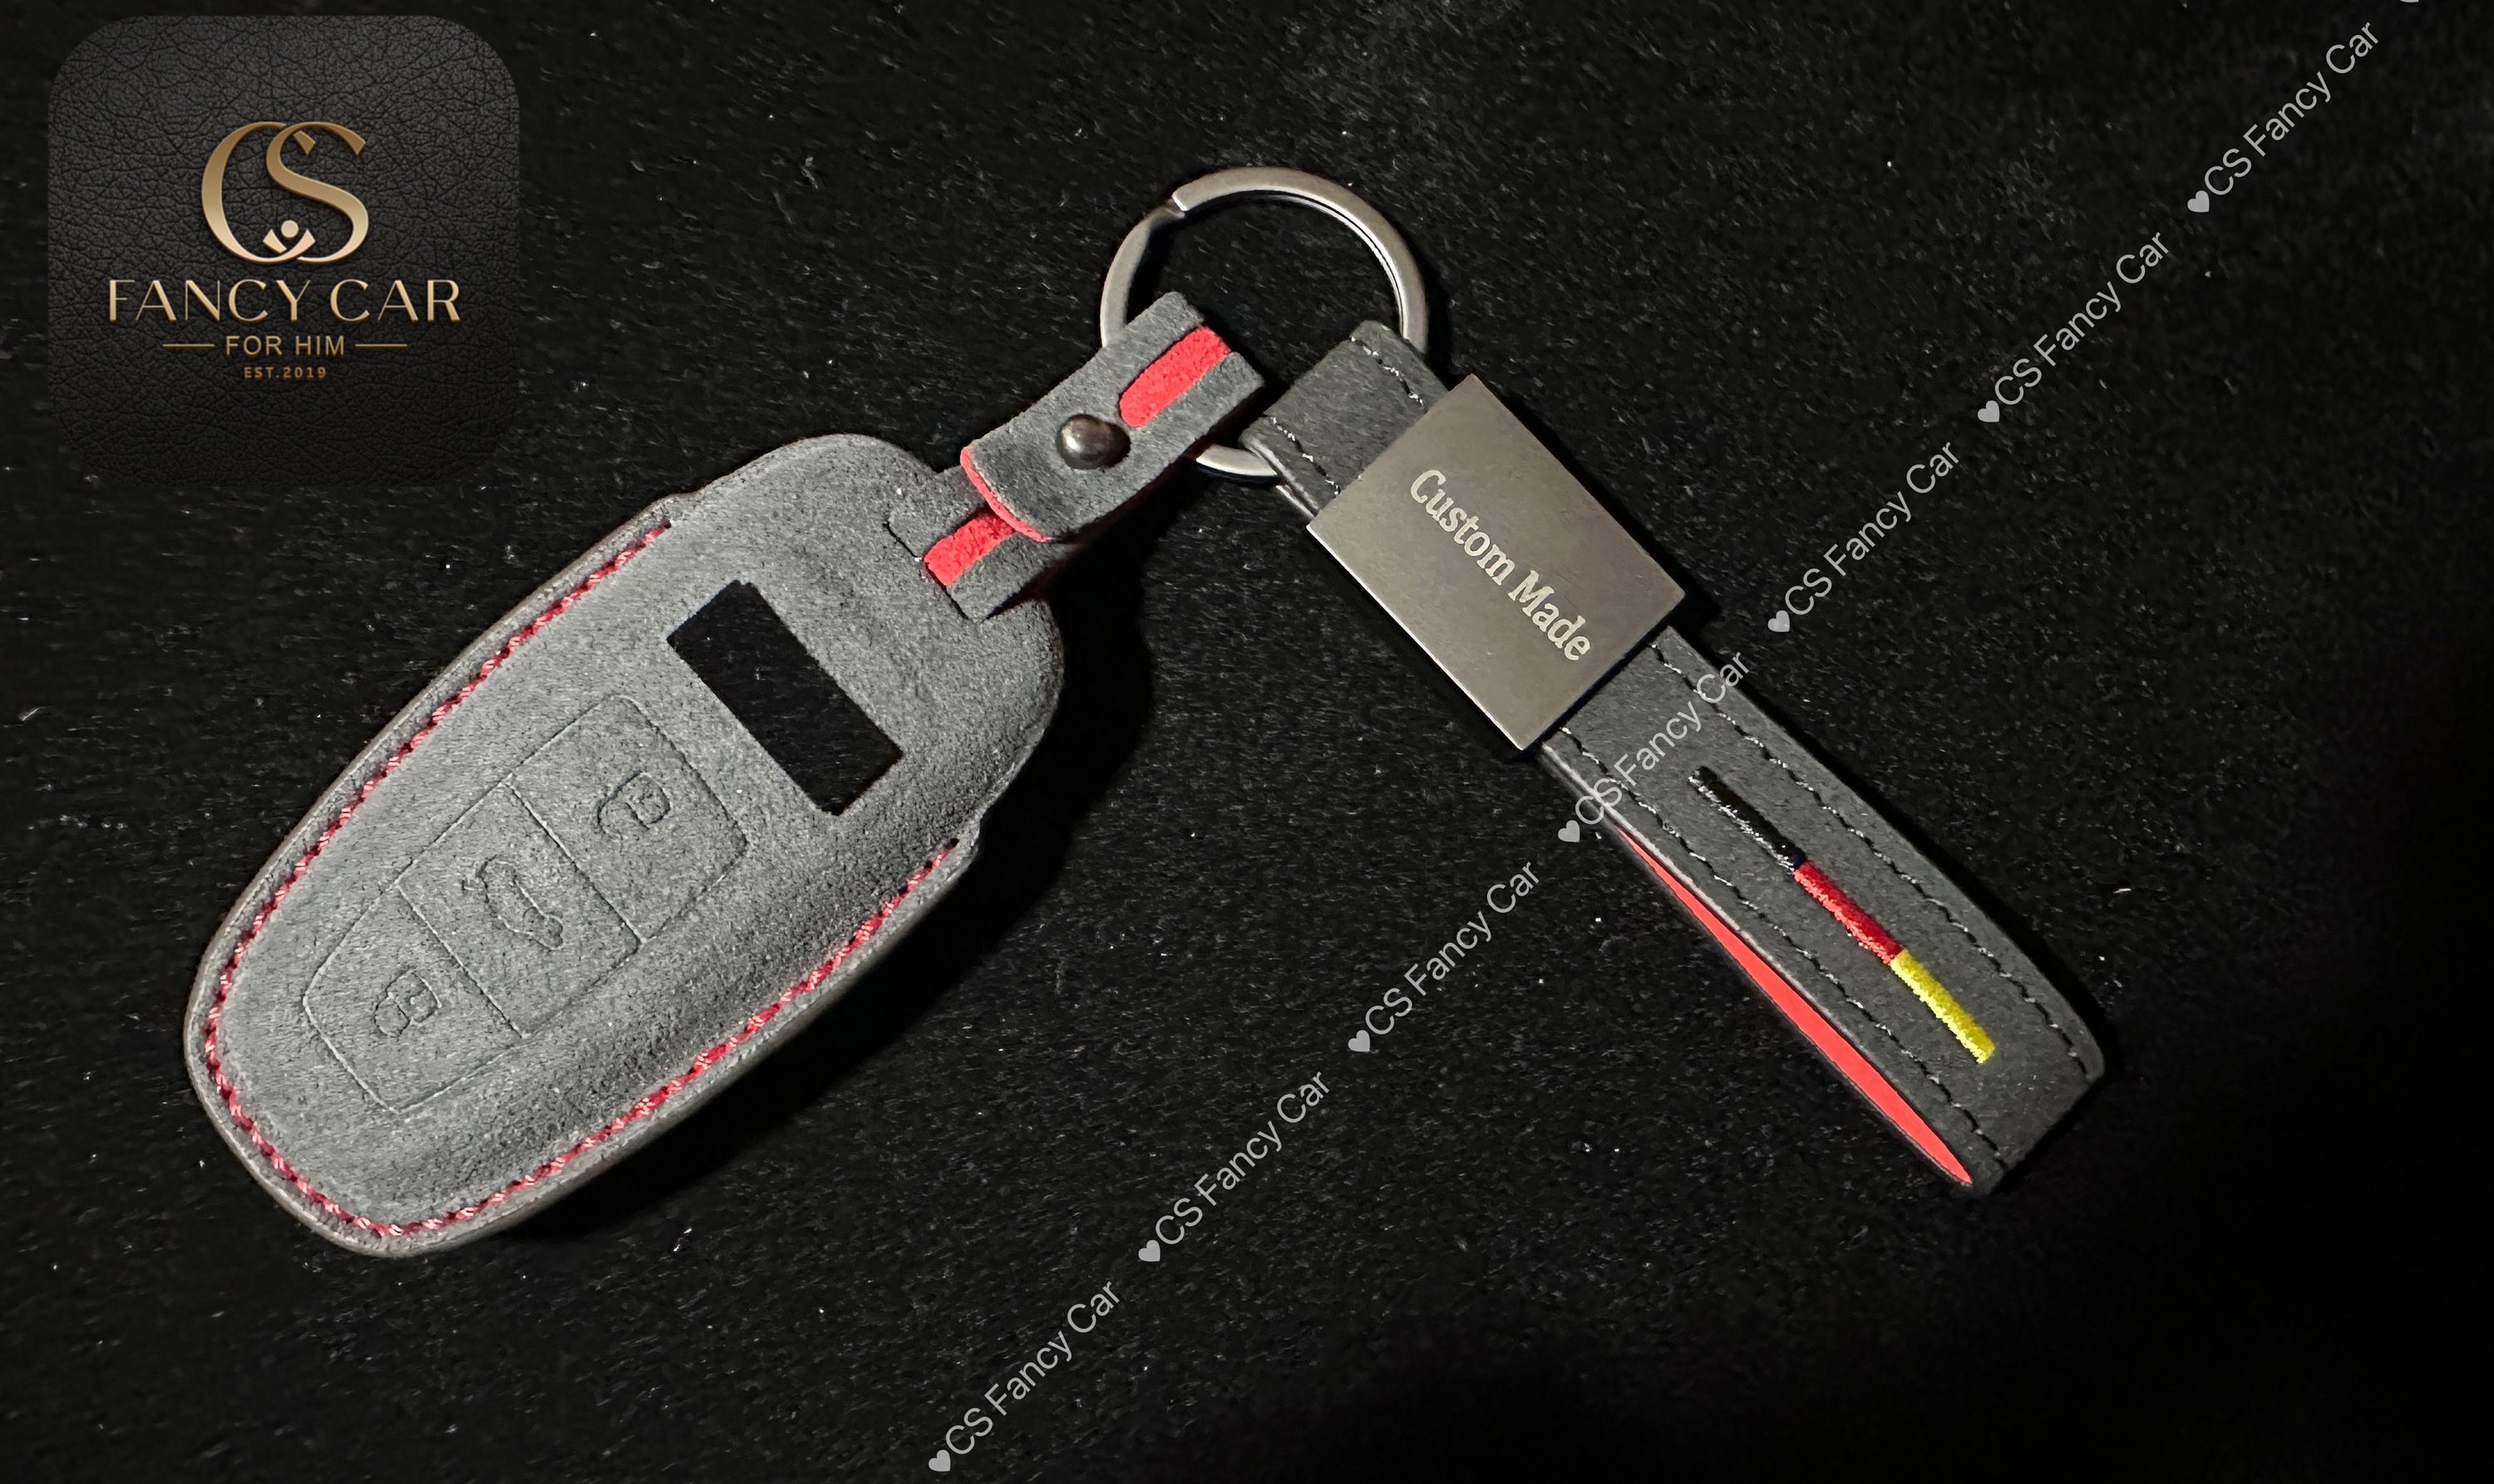 Auto Car Keychain Black Leather Business Key Chain for Key Fob and Key With  Metal Carabiner Hook, Audi price in UAE,  UAE